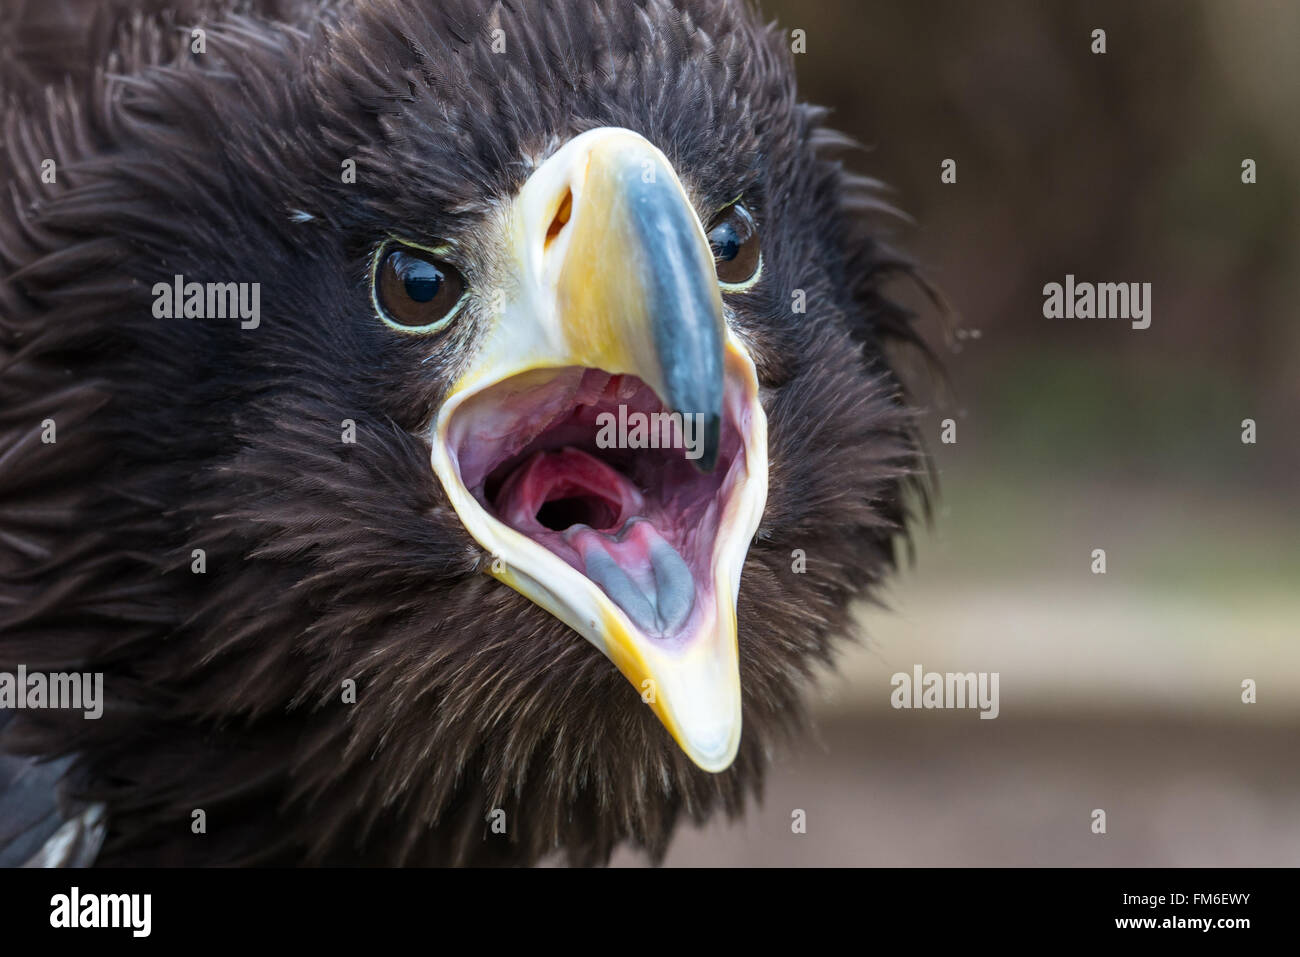 Stellers Sea Eagle {Haliaeetus pelagicus} with its mouth wide open. One of the largest birds of prey, this is a formidable beak. Stock Photo